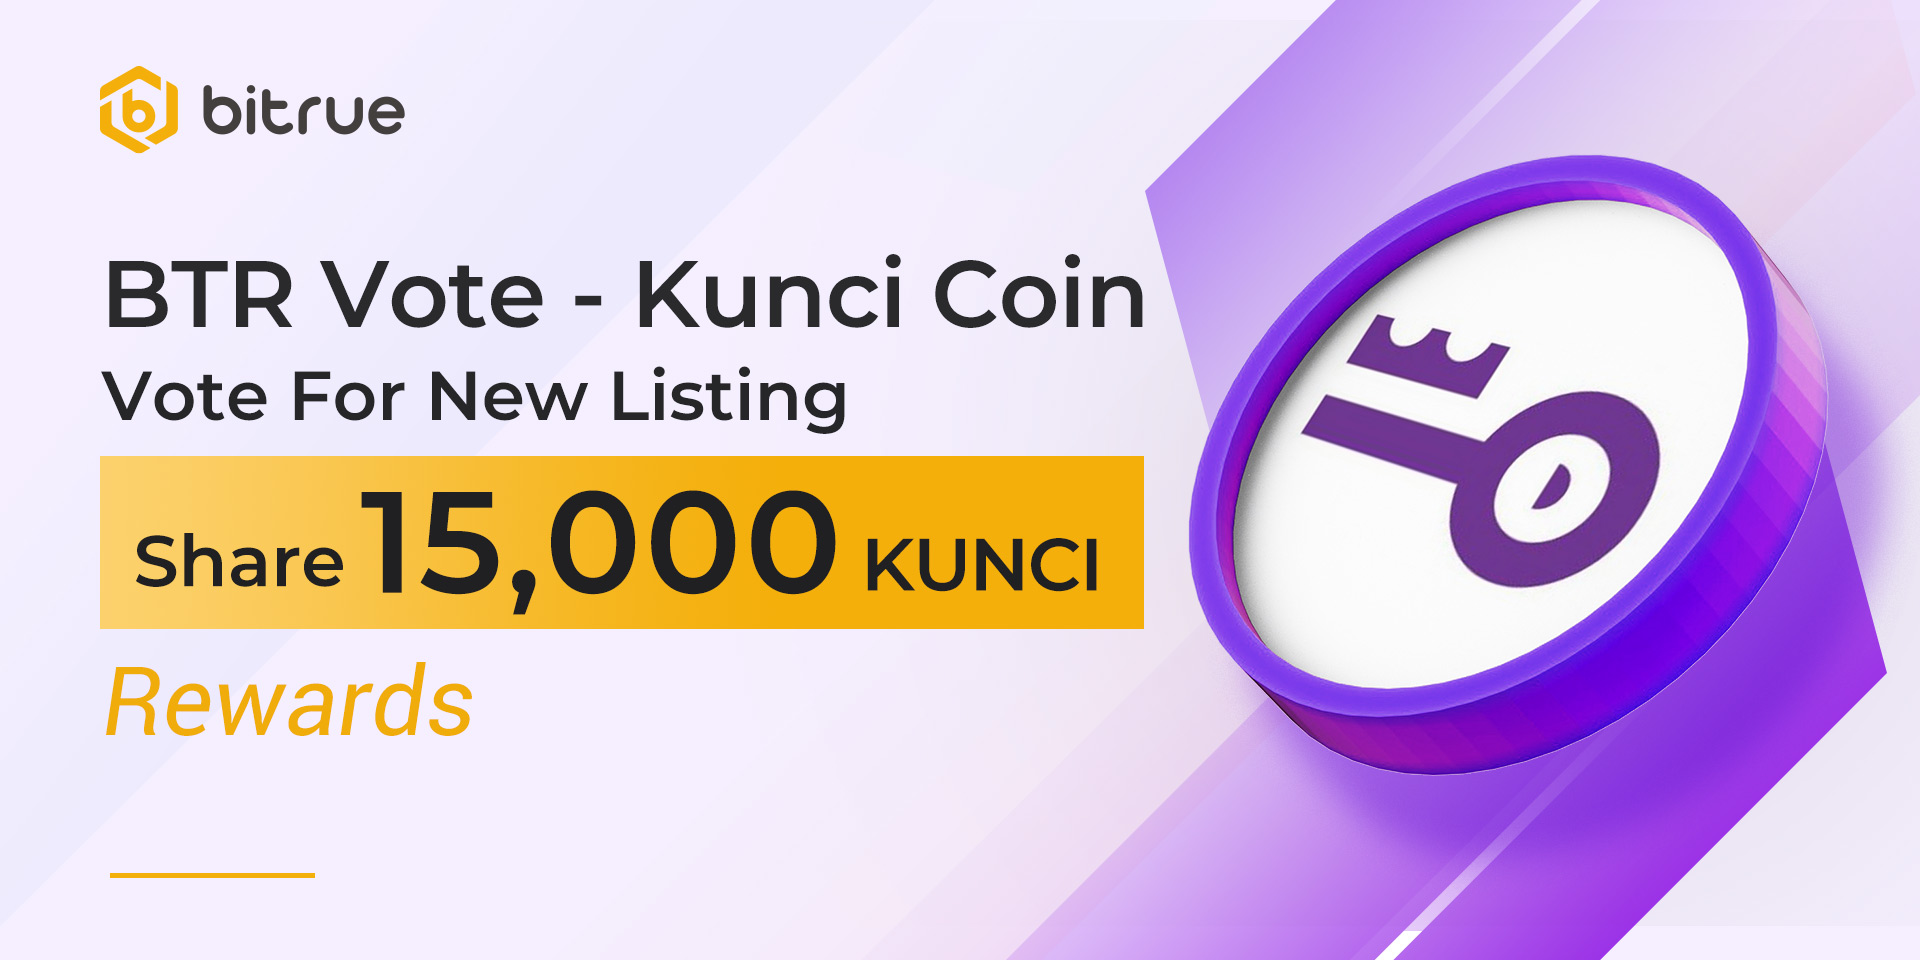 Kunci Coin Enters the BTR Vote with 15,000 KUNCI Staking Rewards on Mar